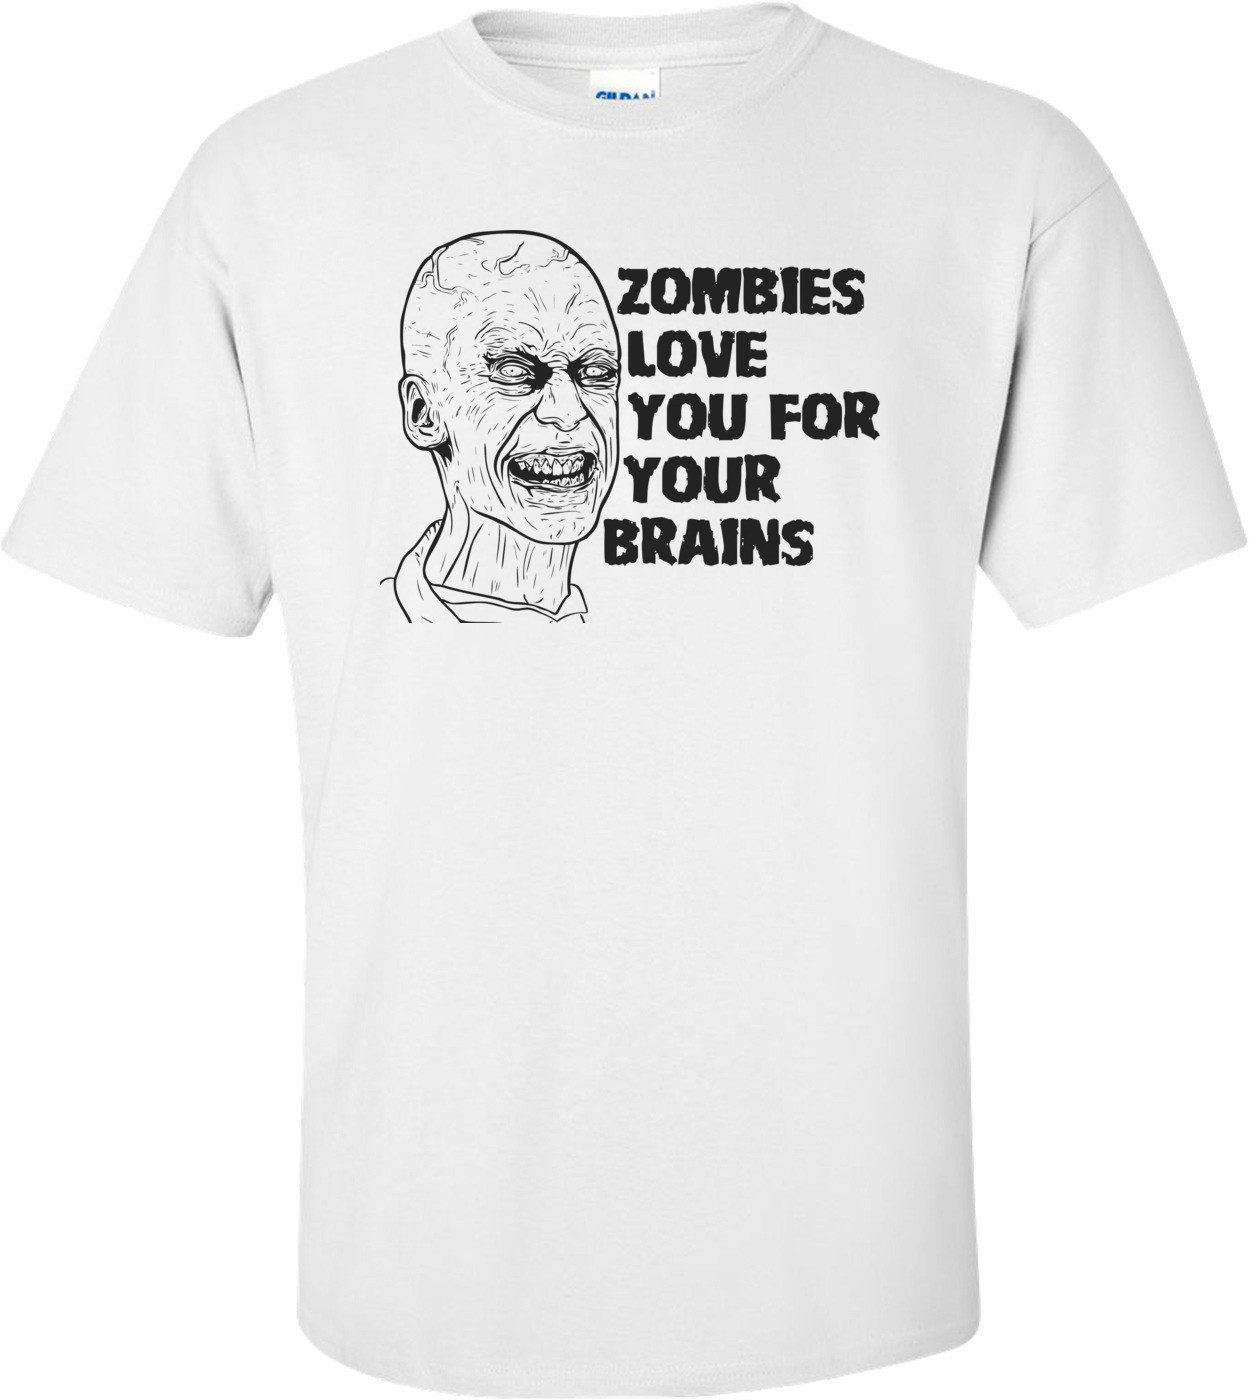 Zombies Love You For Your Brains - Zombie